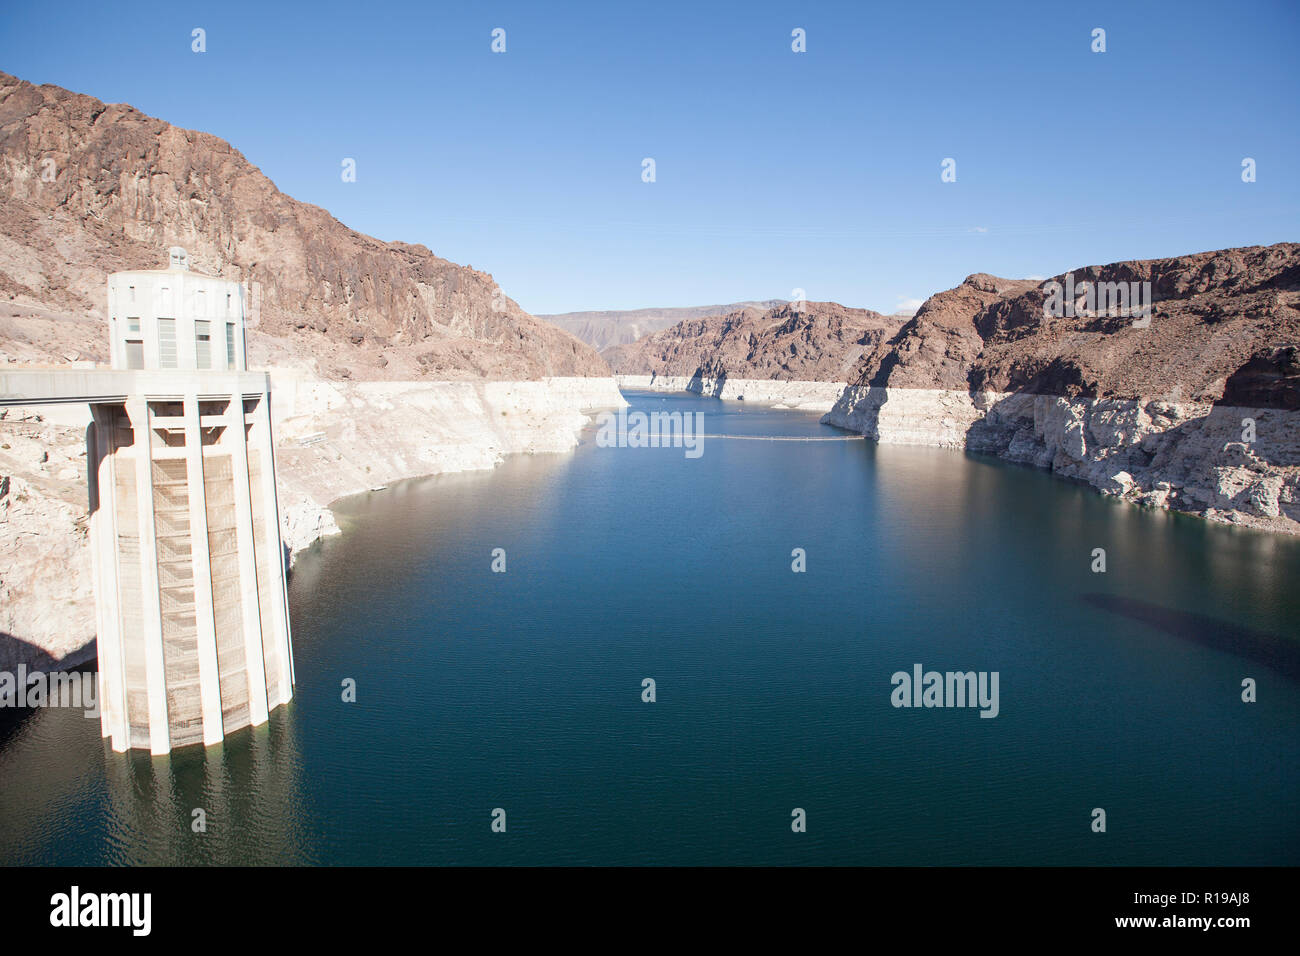 View of Lake Mead  behind Hoover Dam and the water towers. The cliffs discoloration shows how much Lake Mead has receded in level Stock Photo